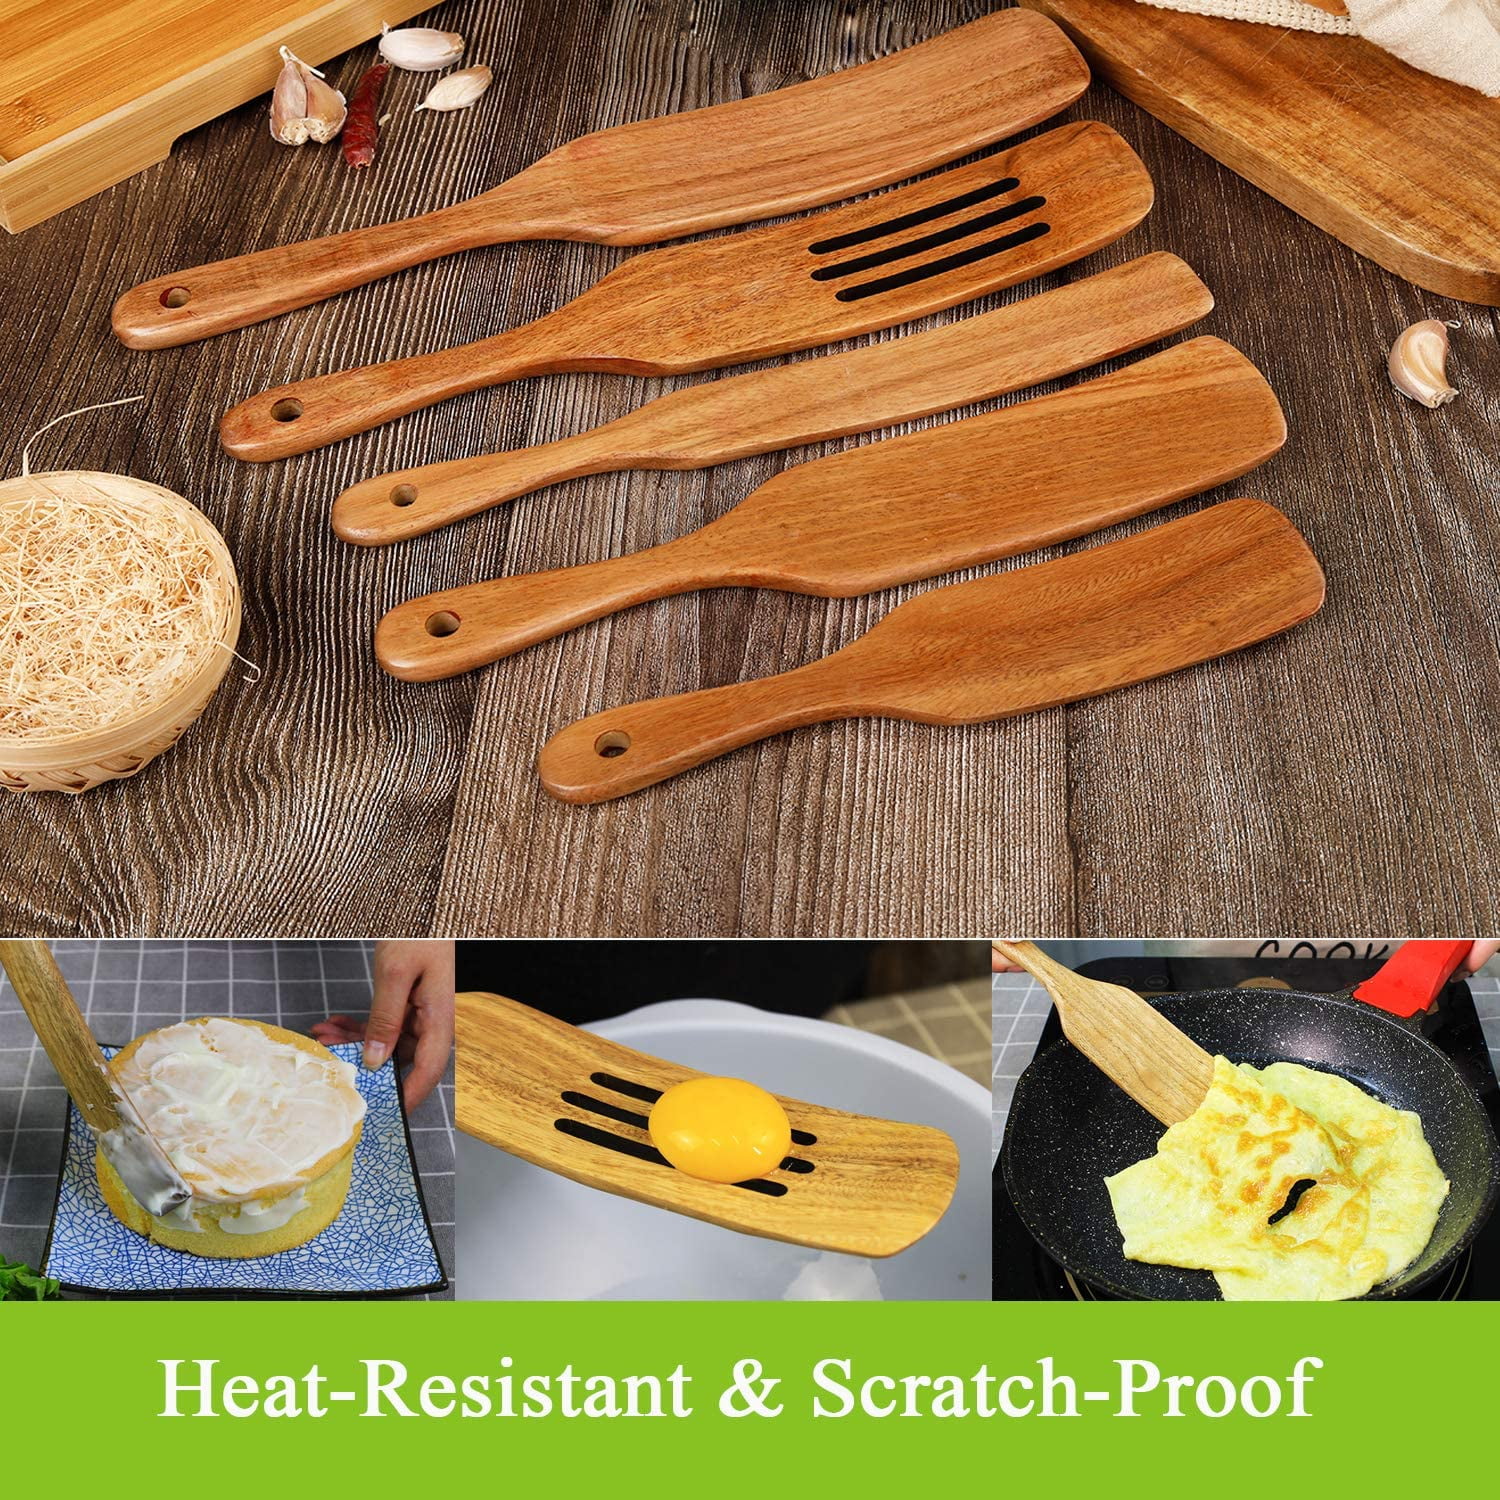 Serving 4 Pack Enkrio Natural Acacia Wooden Spoons for Cooking Spurtle Set Scrapping Heat Resistance Non-Stick Mixing Scooping Handmade Spurtles Kitchen Tools As Seen On TV for Stirring 